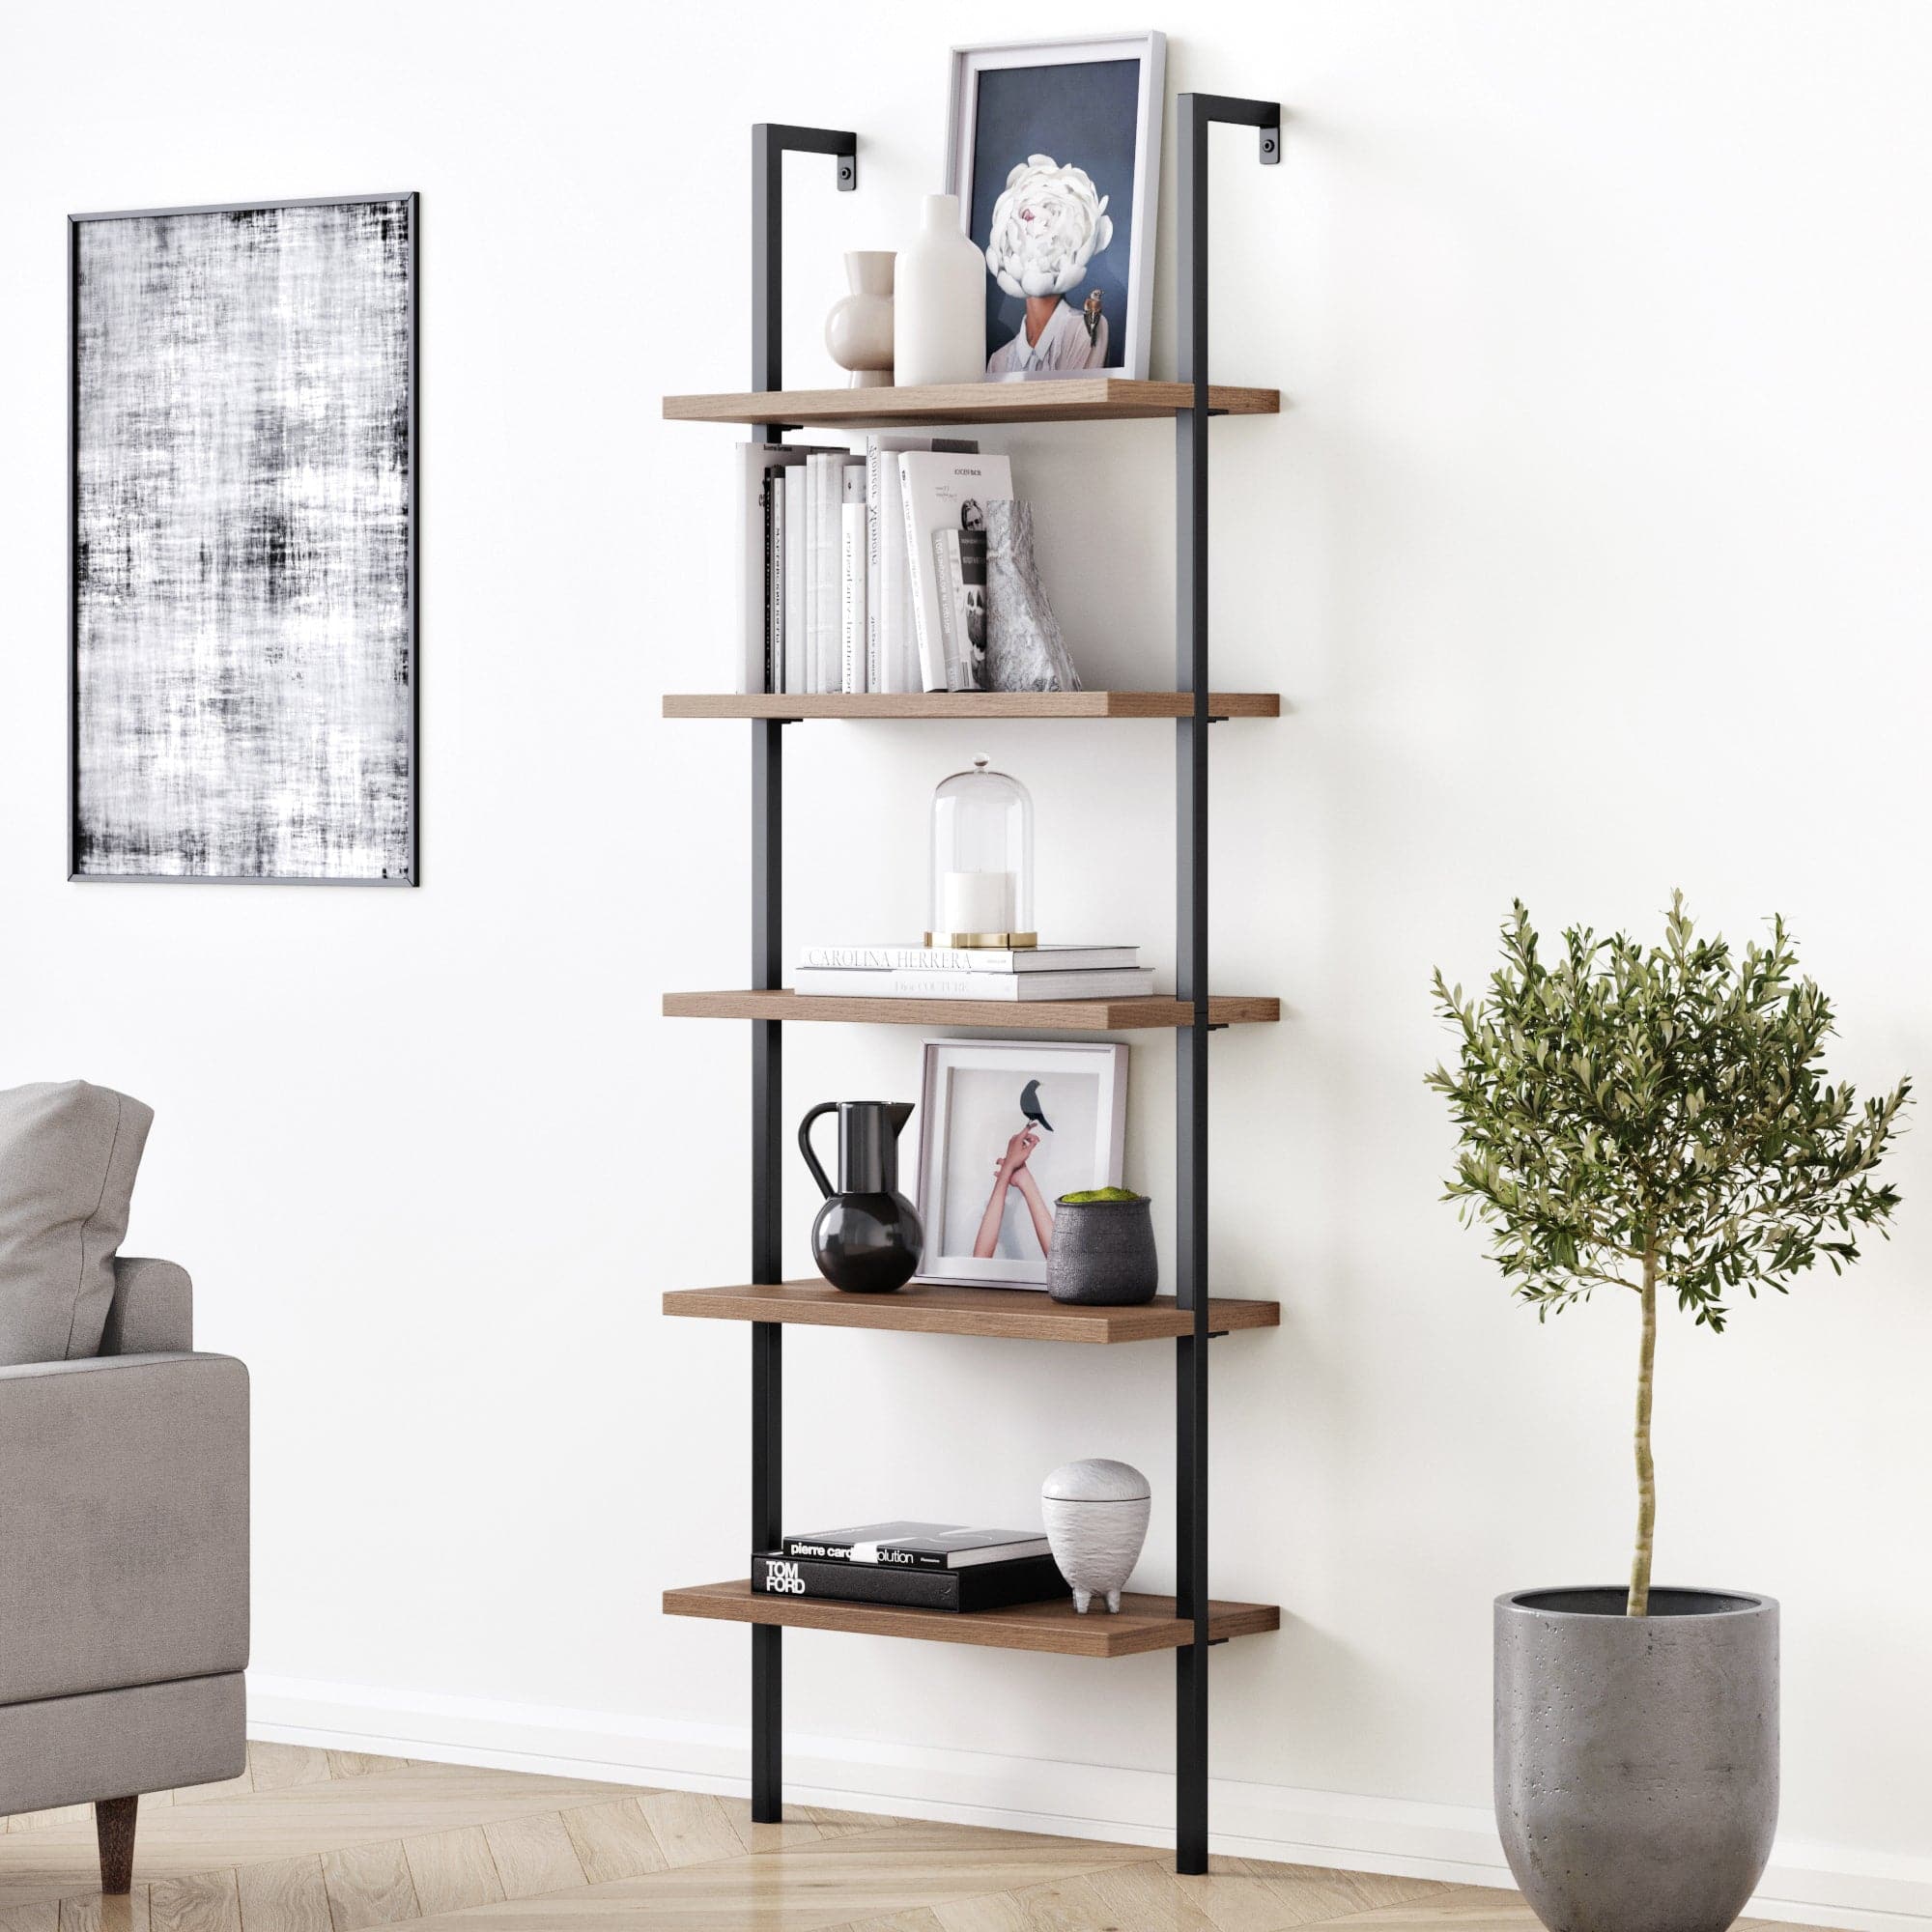 The stylish Theo Bookcase by Nathan James fully assembled and in use.